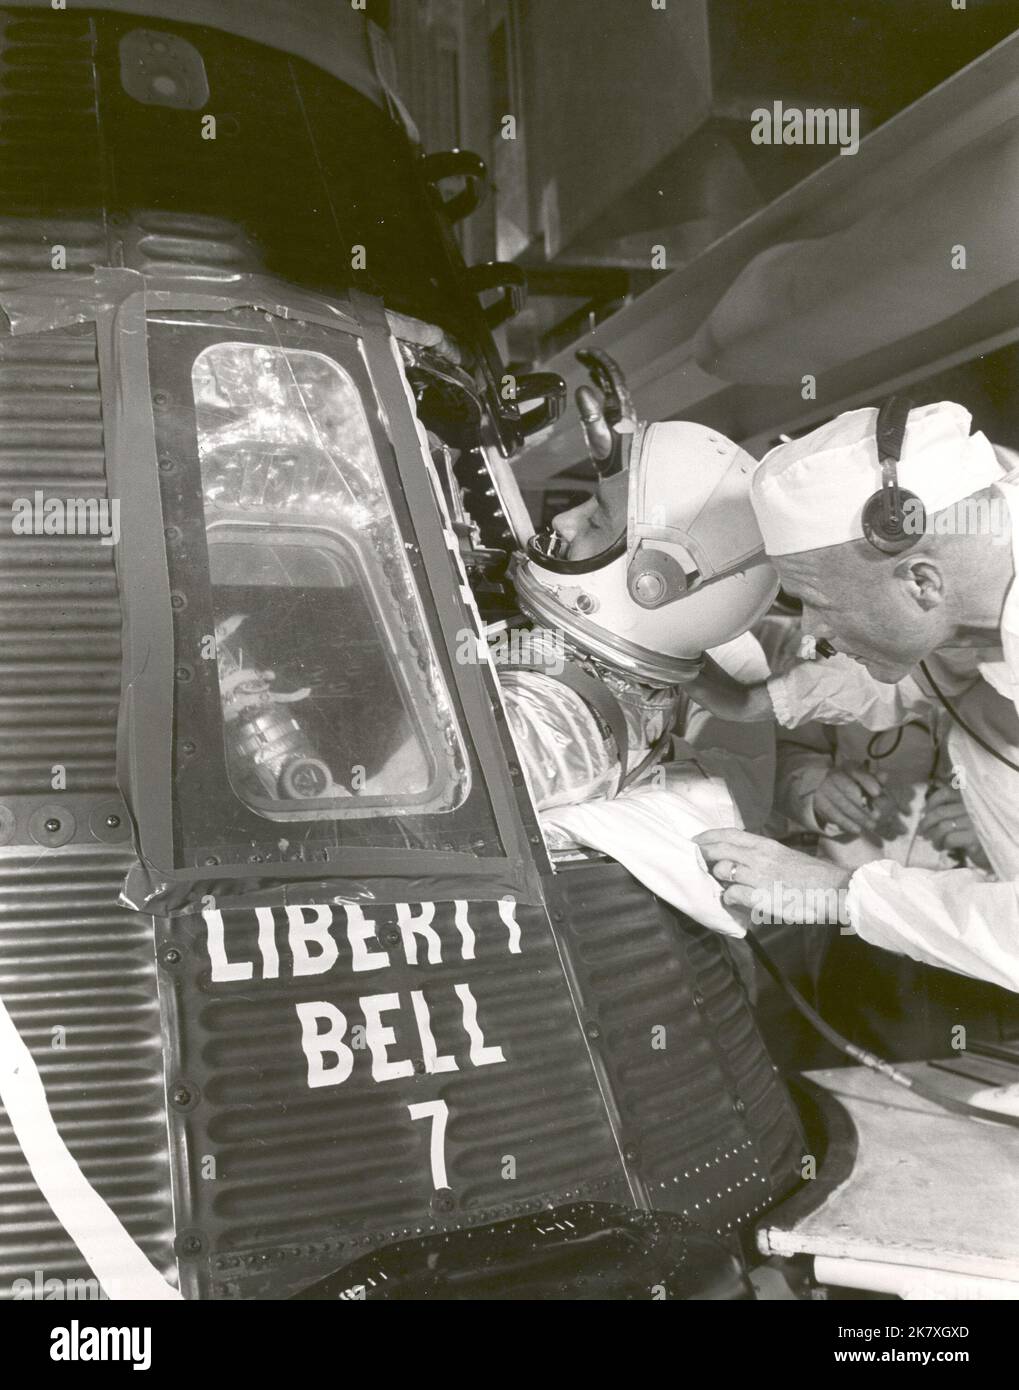 Astronaut Gus Grissom climbs into 'Liberty Bell 7' spacecraft before launch on the morning of July 21, 1961. Astronaut John Glenn, Grissom's back up, helps him into the capsule. Stock Photo